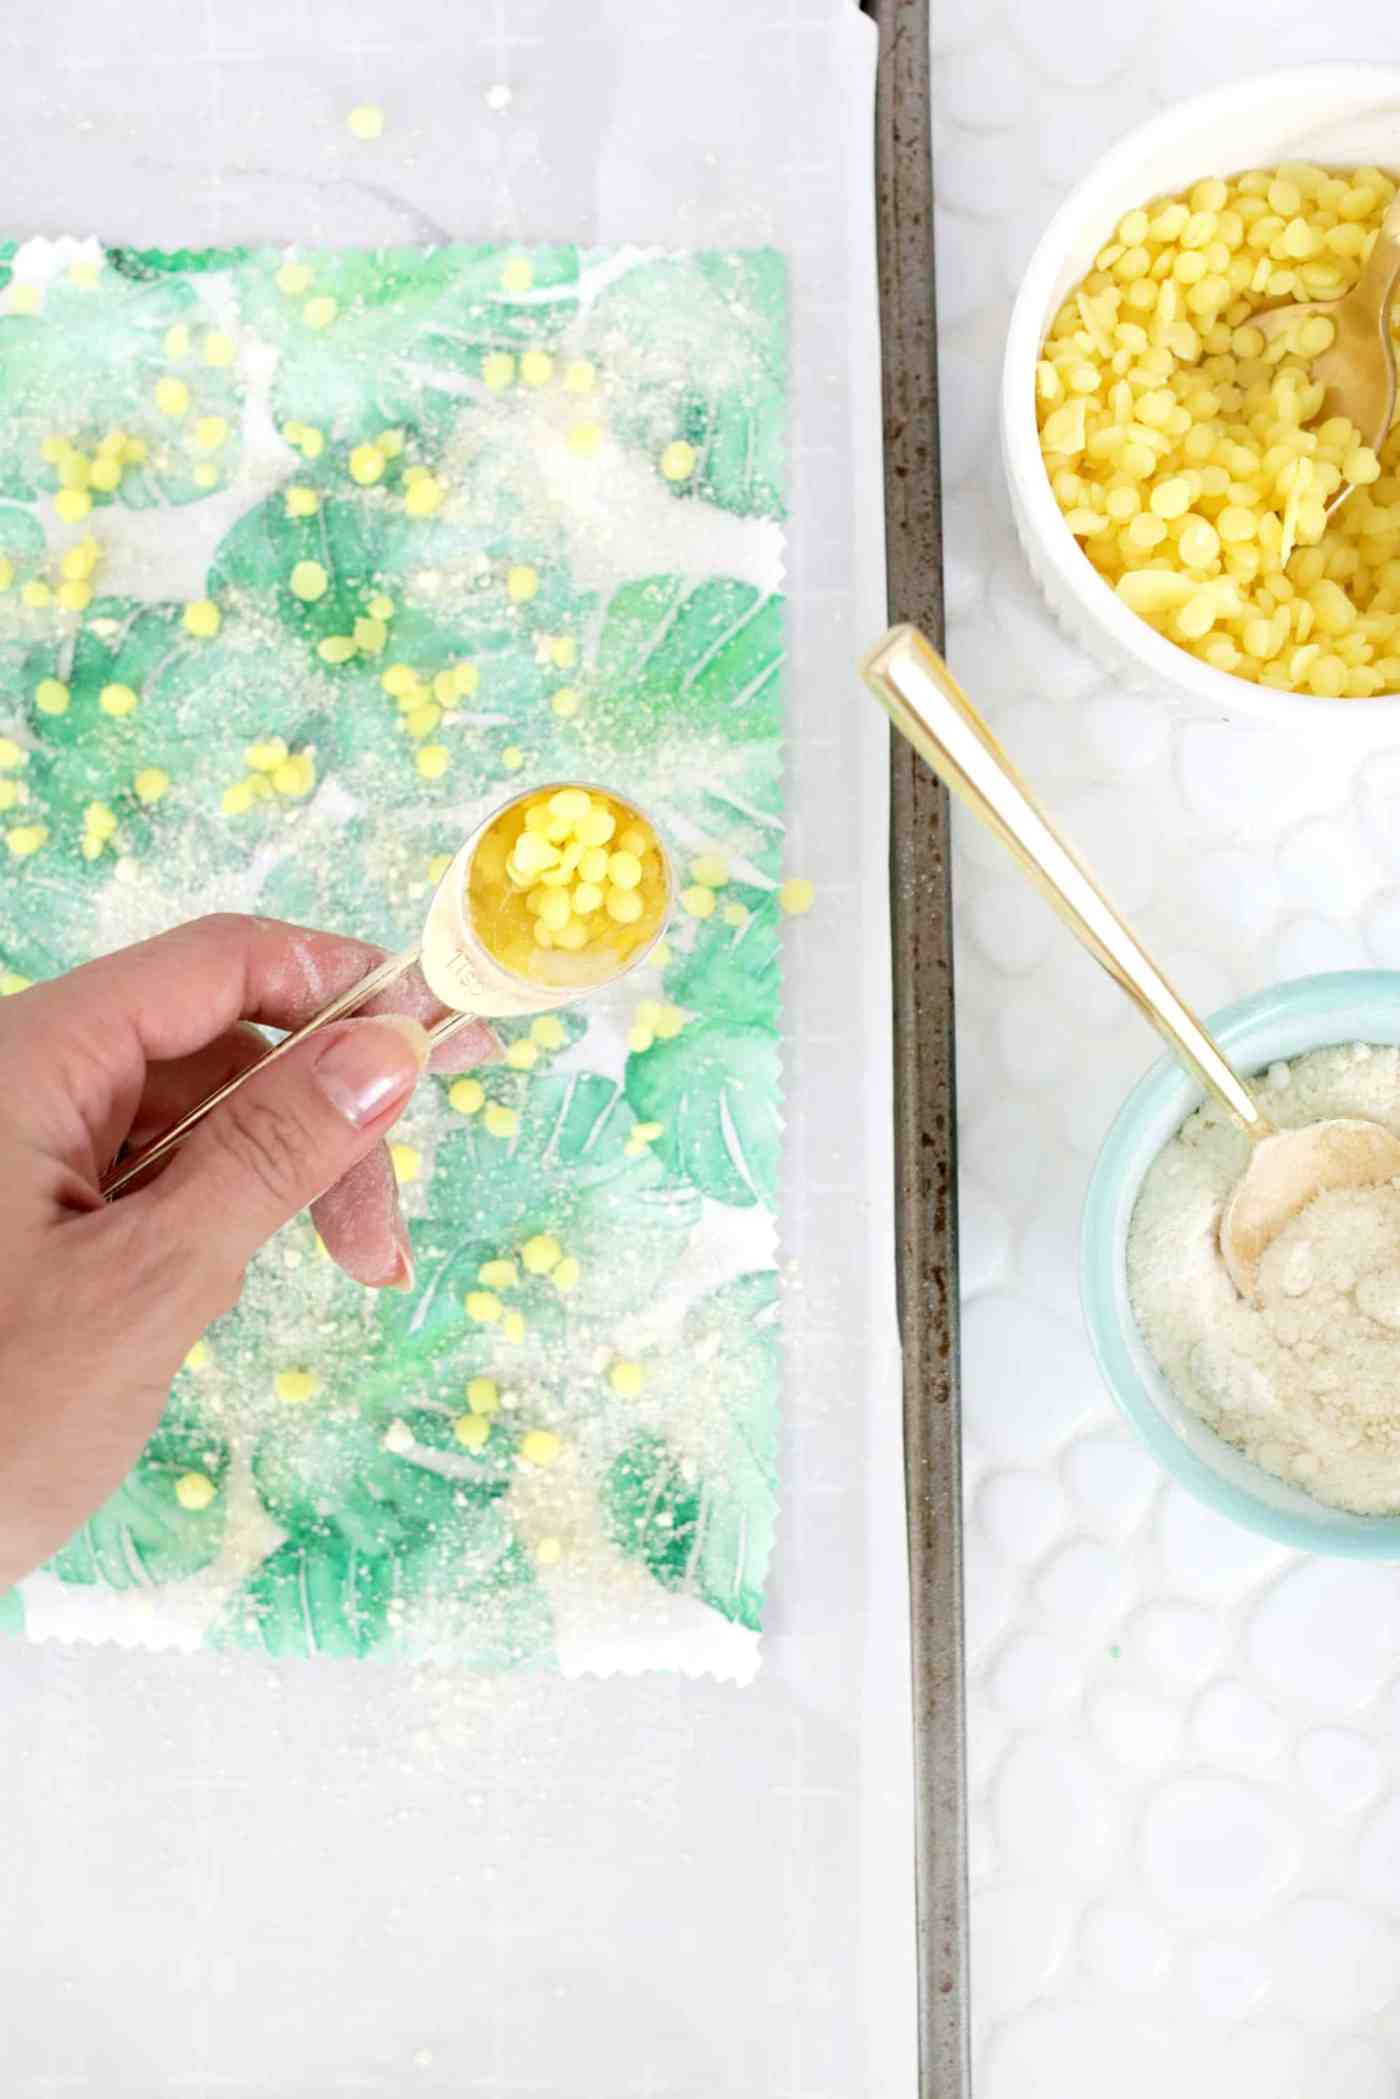 Make growers yourself and distribute beeswax pastels over a cloth